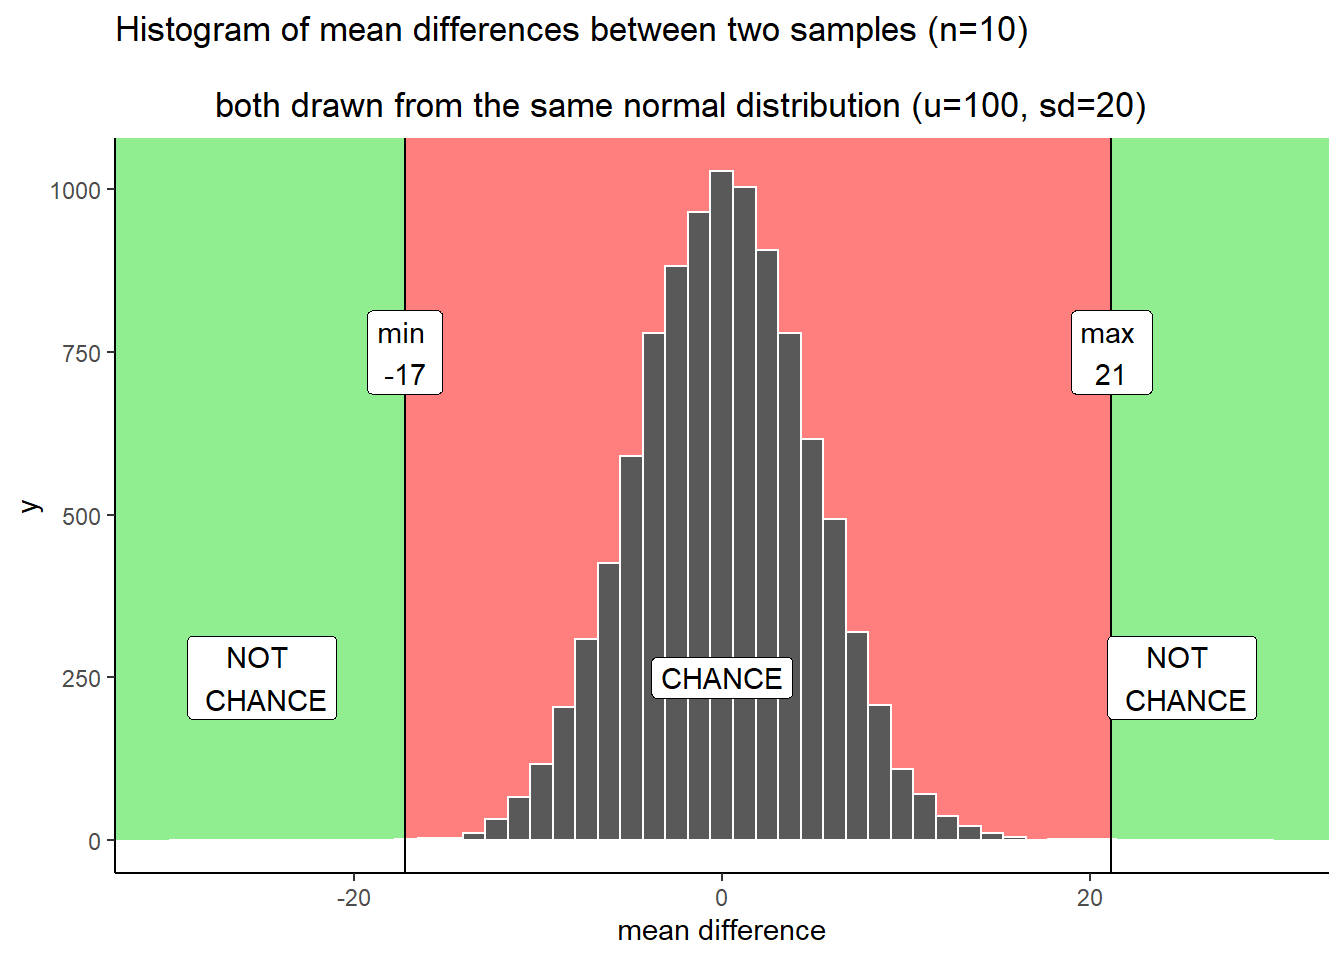 Applying decision boundaries to the histogrm of mean differences. The boundaries identify what differences chance did or did not produce in the simulation